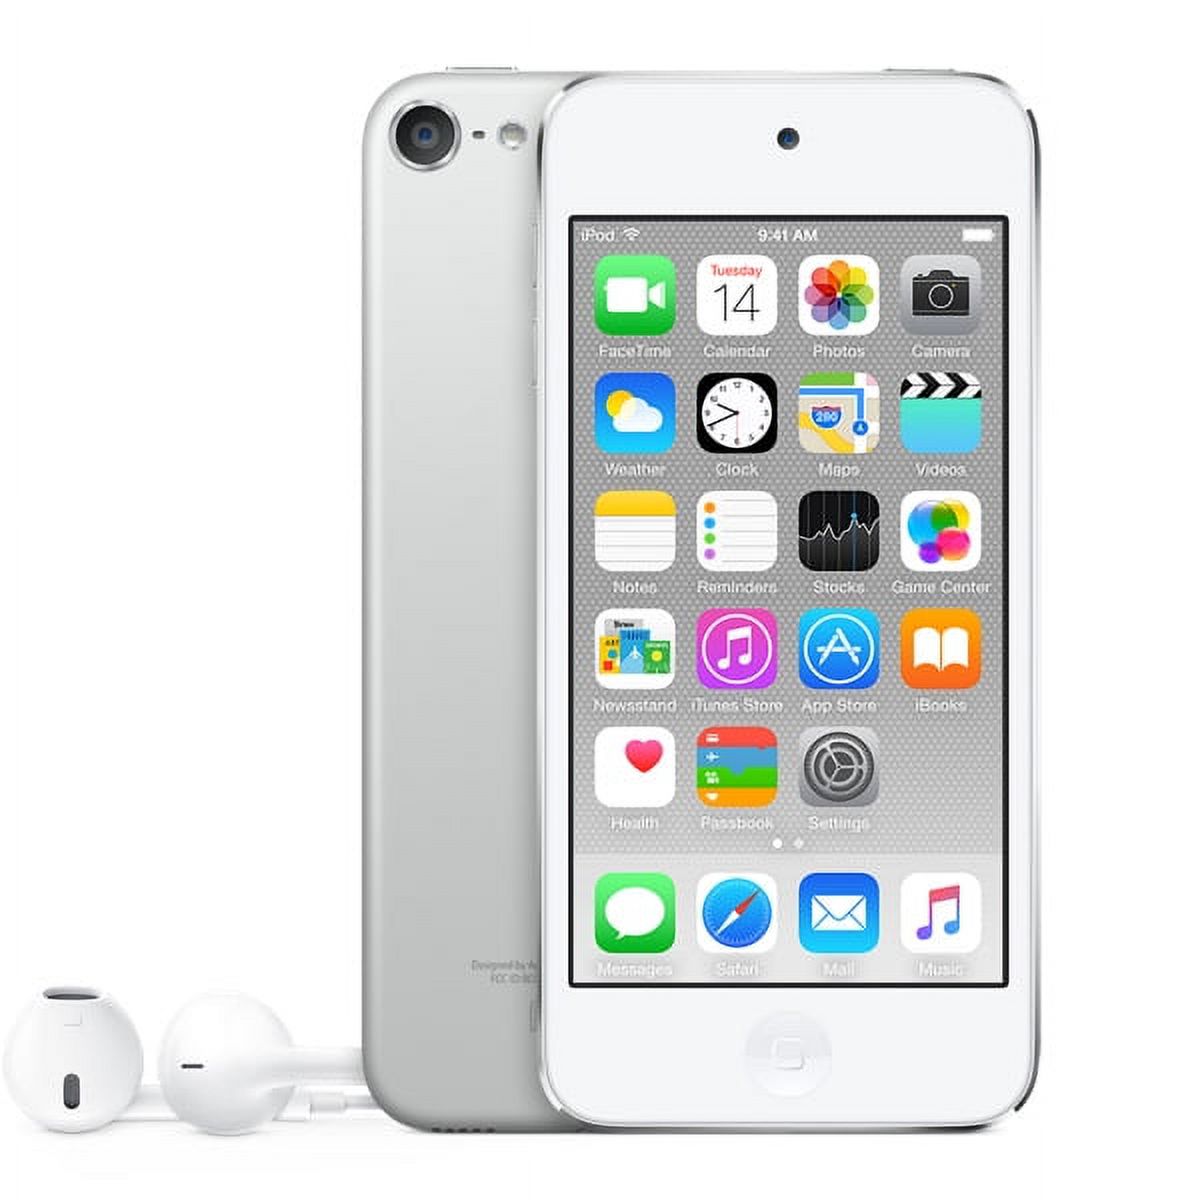 Apple iPod touch - 6th generation - digital player - Apple iOS 12 - 64 GB - silver - image 5 of 5